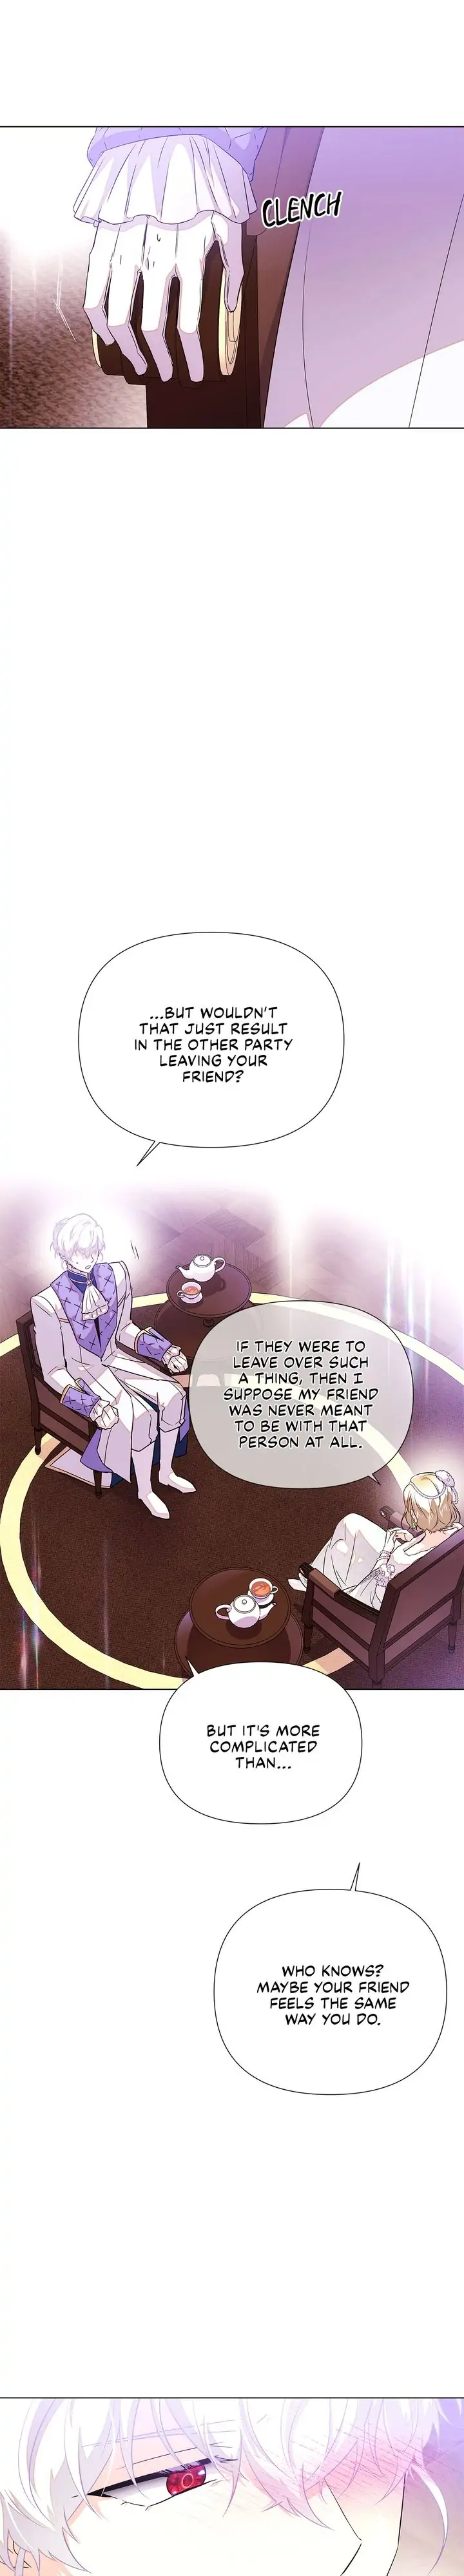 The Villain Discovered My Identity - Chapter 92 Page 10